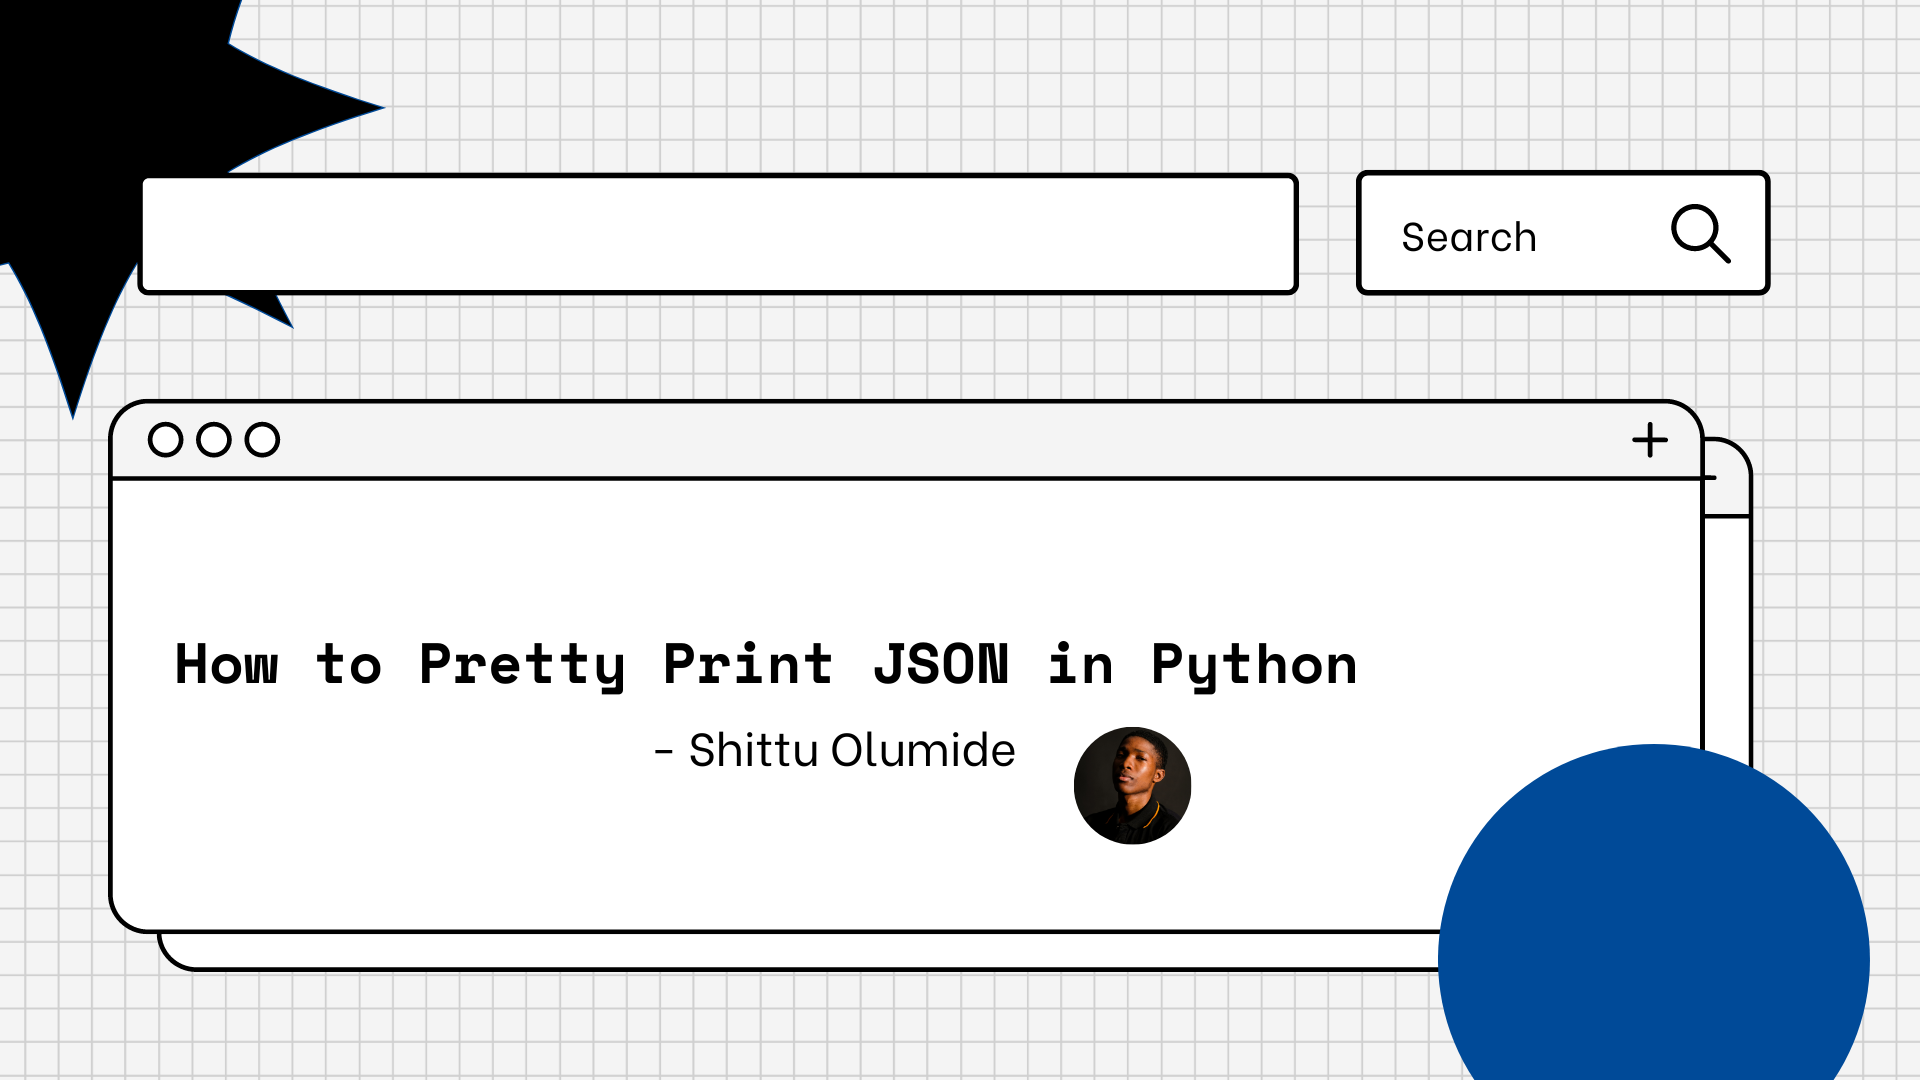 How to Pretty Print JSON in Python